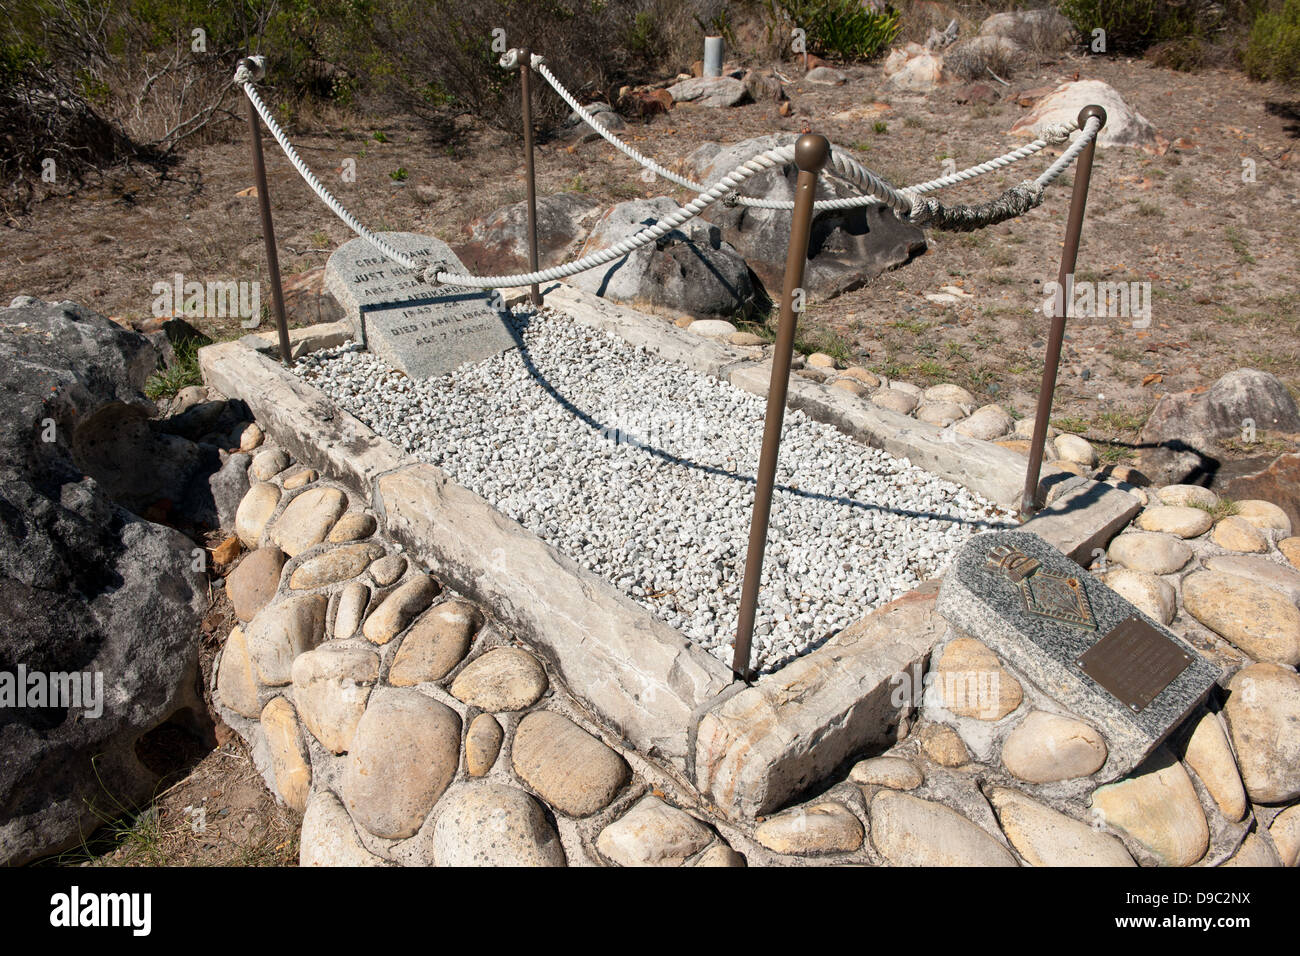 Grave of the dog Just Nuisance, Simon's Town, False Bay, South Africa Stock Photo